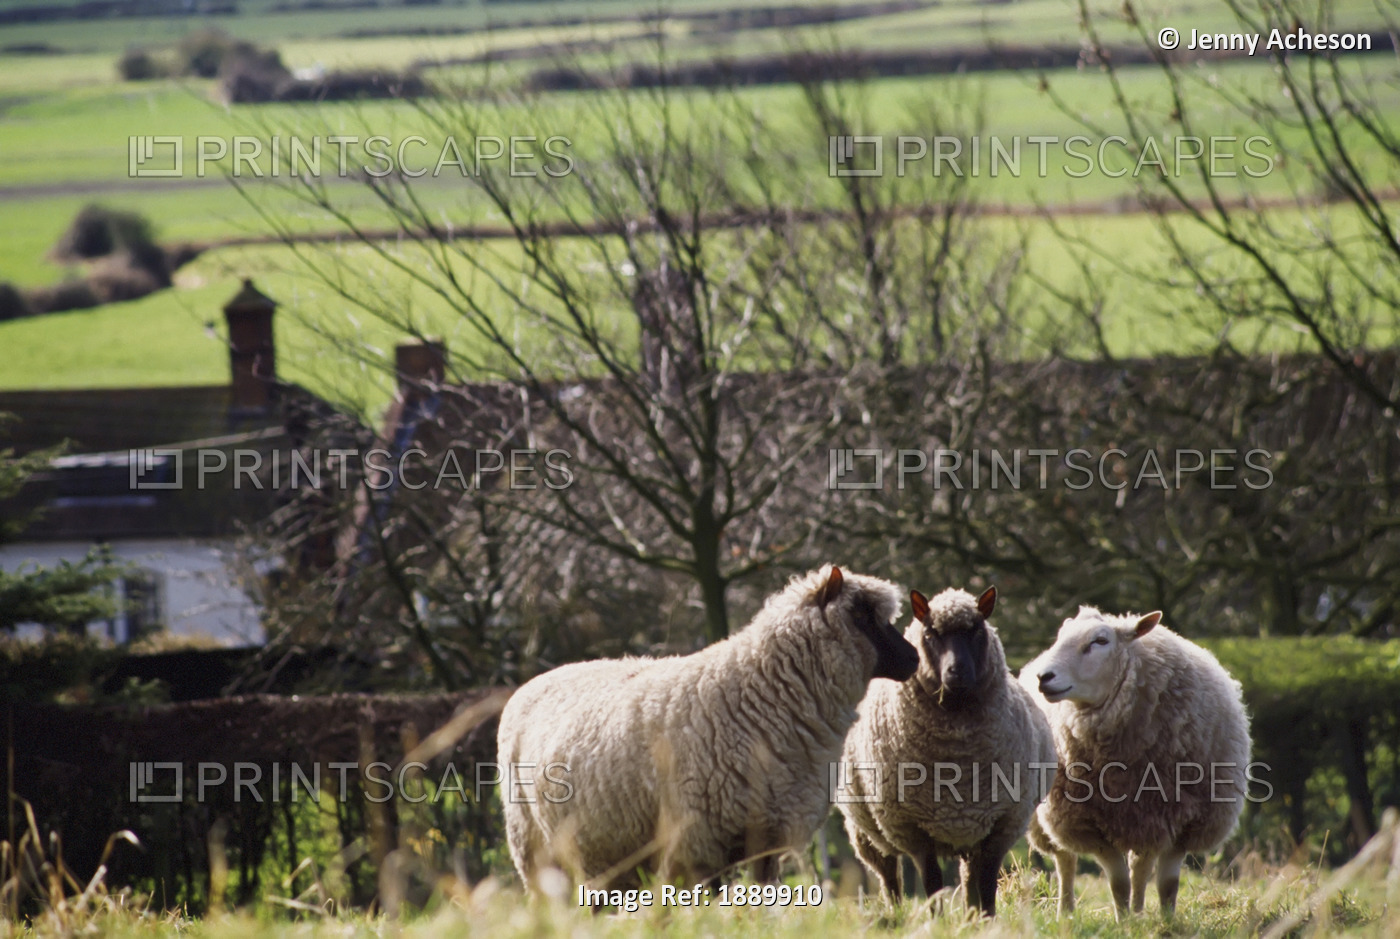 Three Sheep In A Field With Stone Houses And Pastures In The Background.